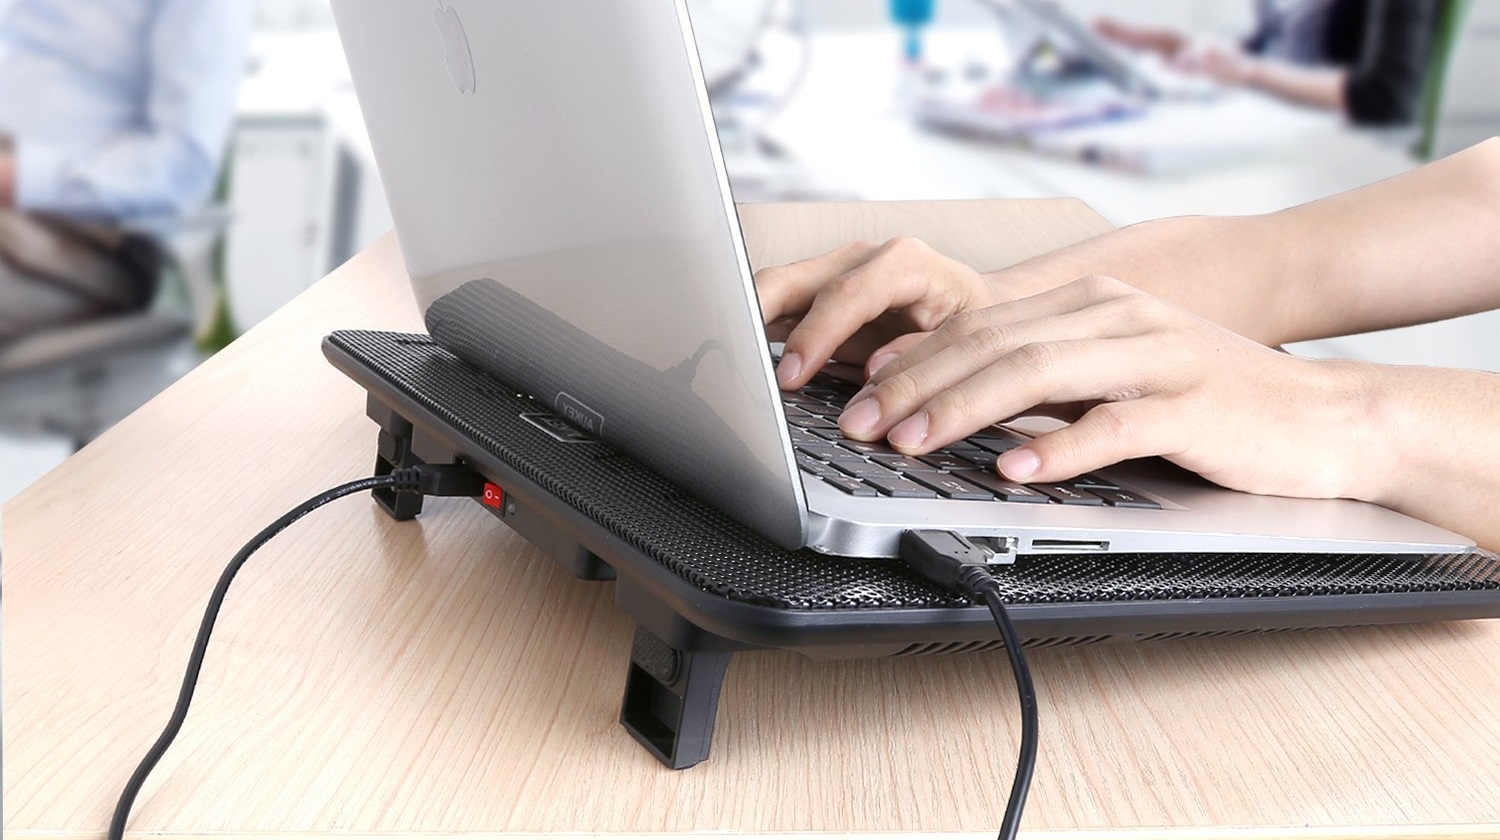 A laptop with a cooling pad.